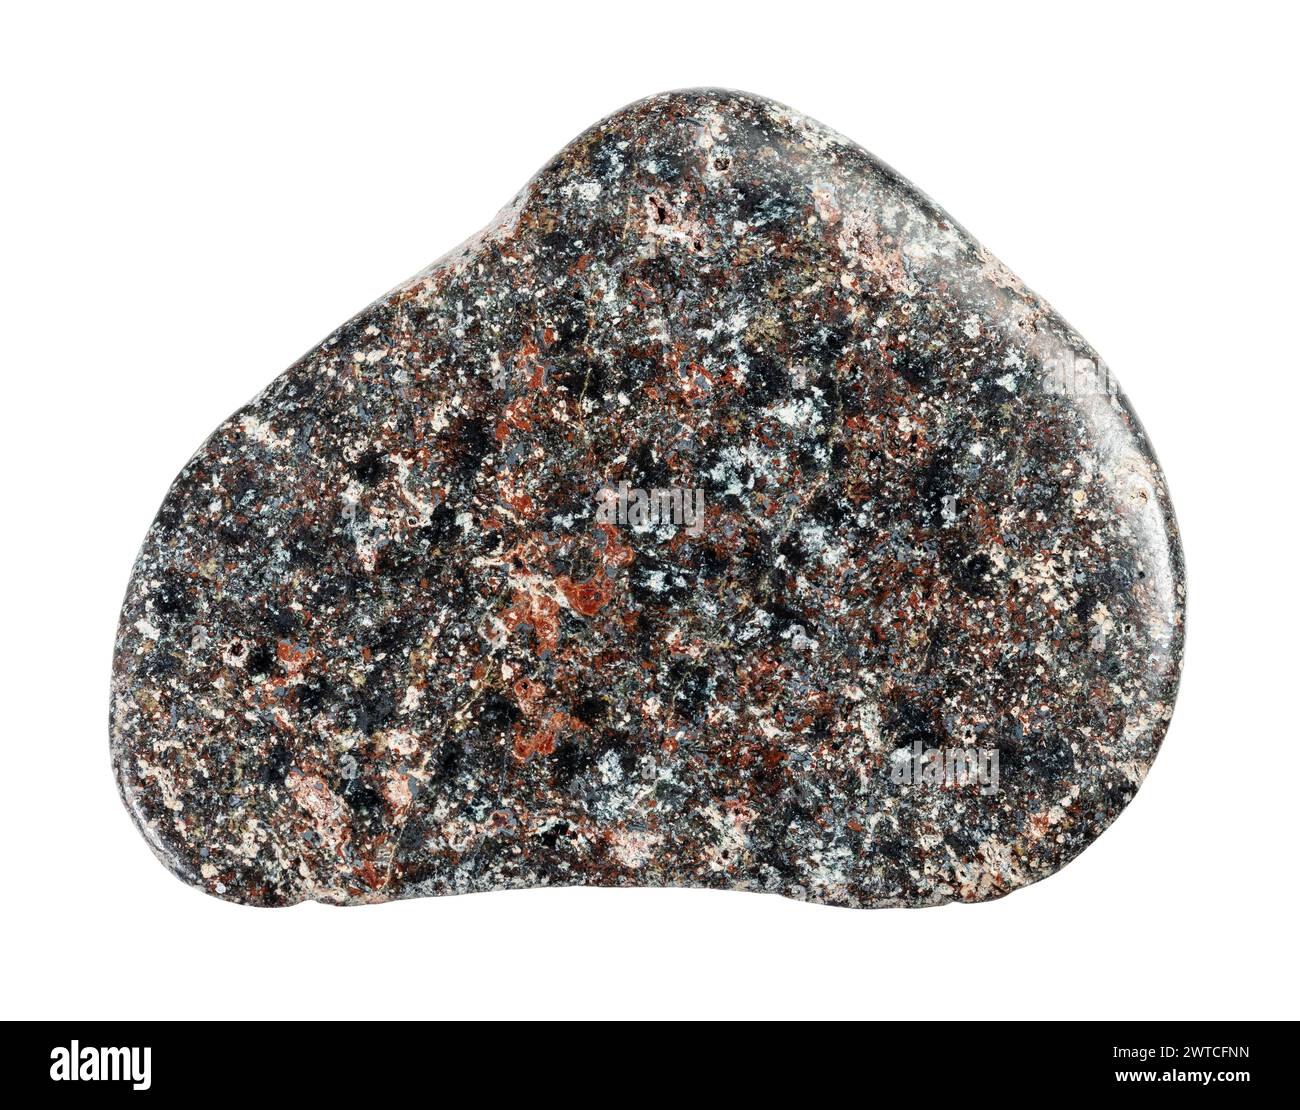 specimen of natural tumbled basalt with hematite rock cutout on white background Stock Photo